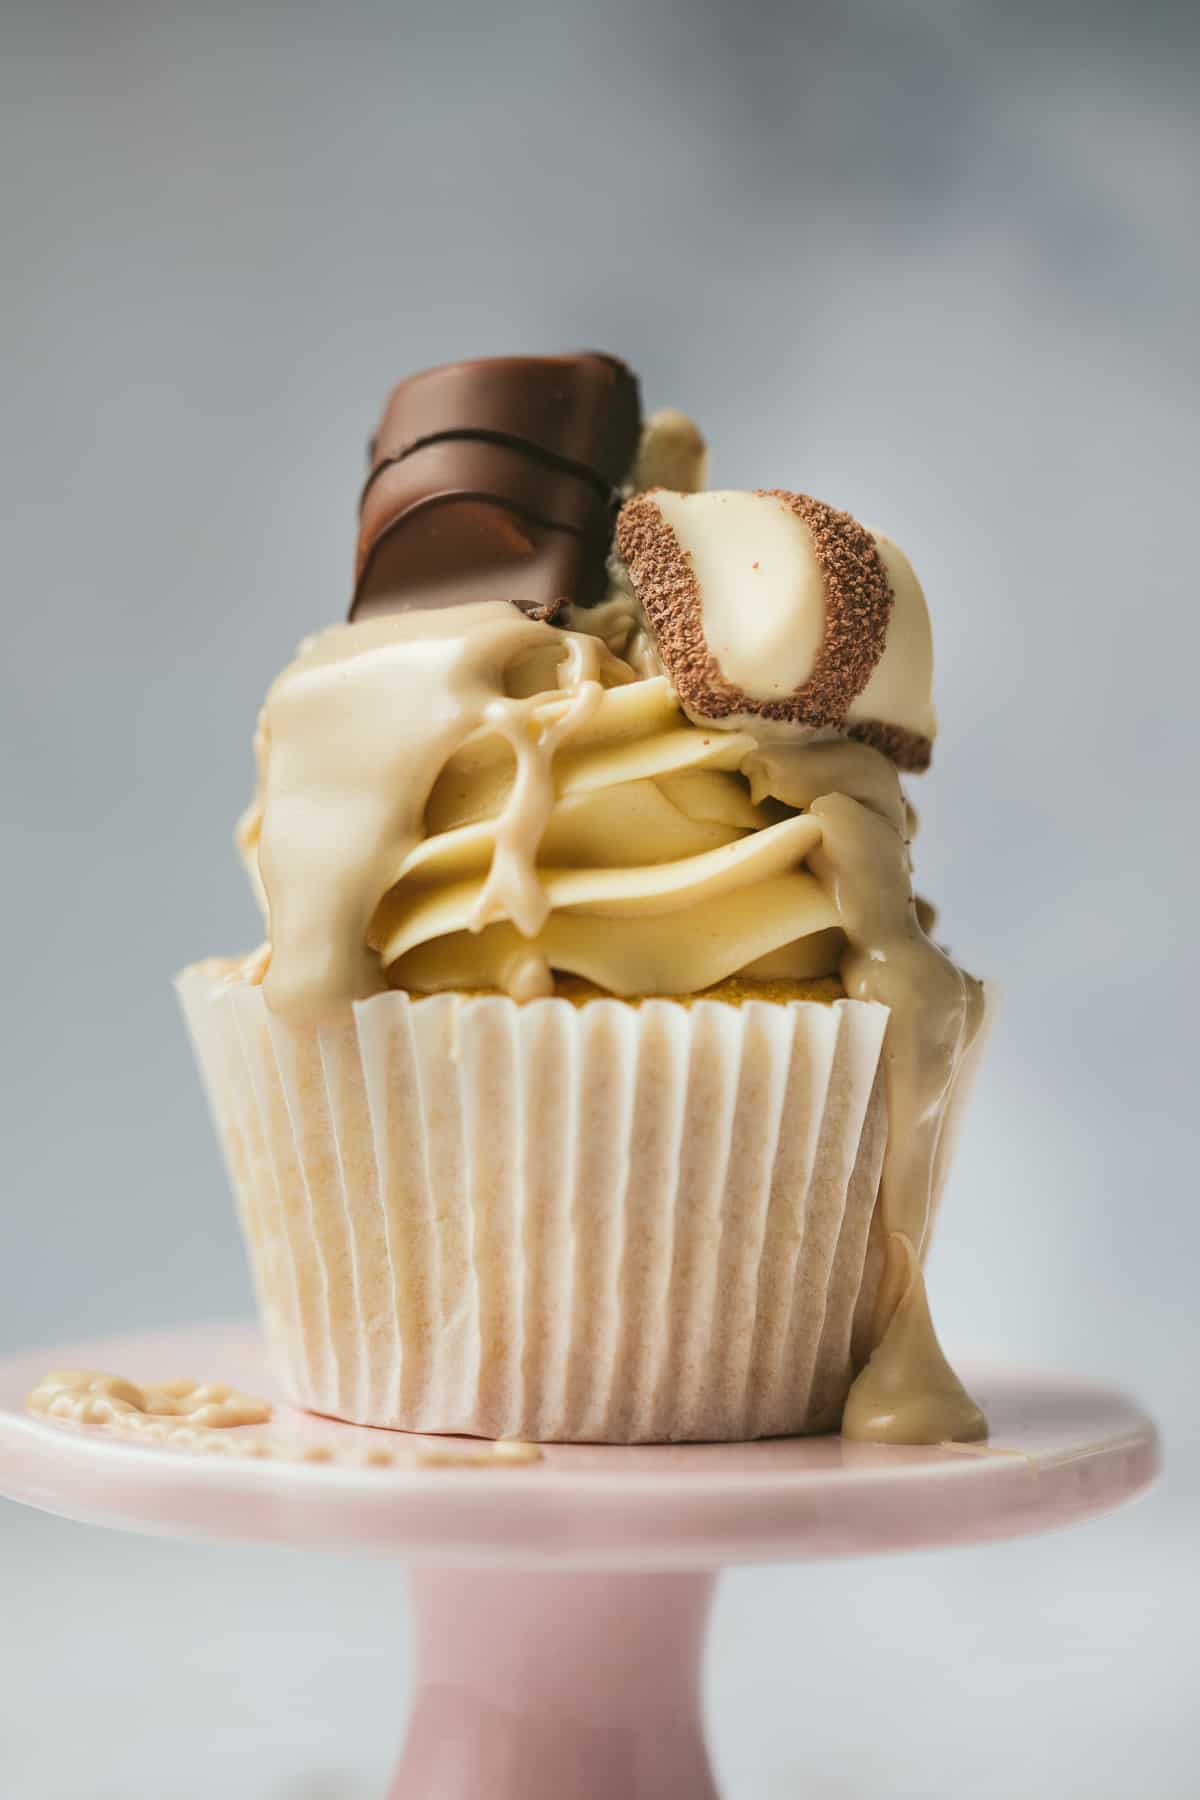 A Kinder Bueno Cupcake that has been drizzled with Kinder spread and topped with chocolate and white Kinder Bueno pieces. 